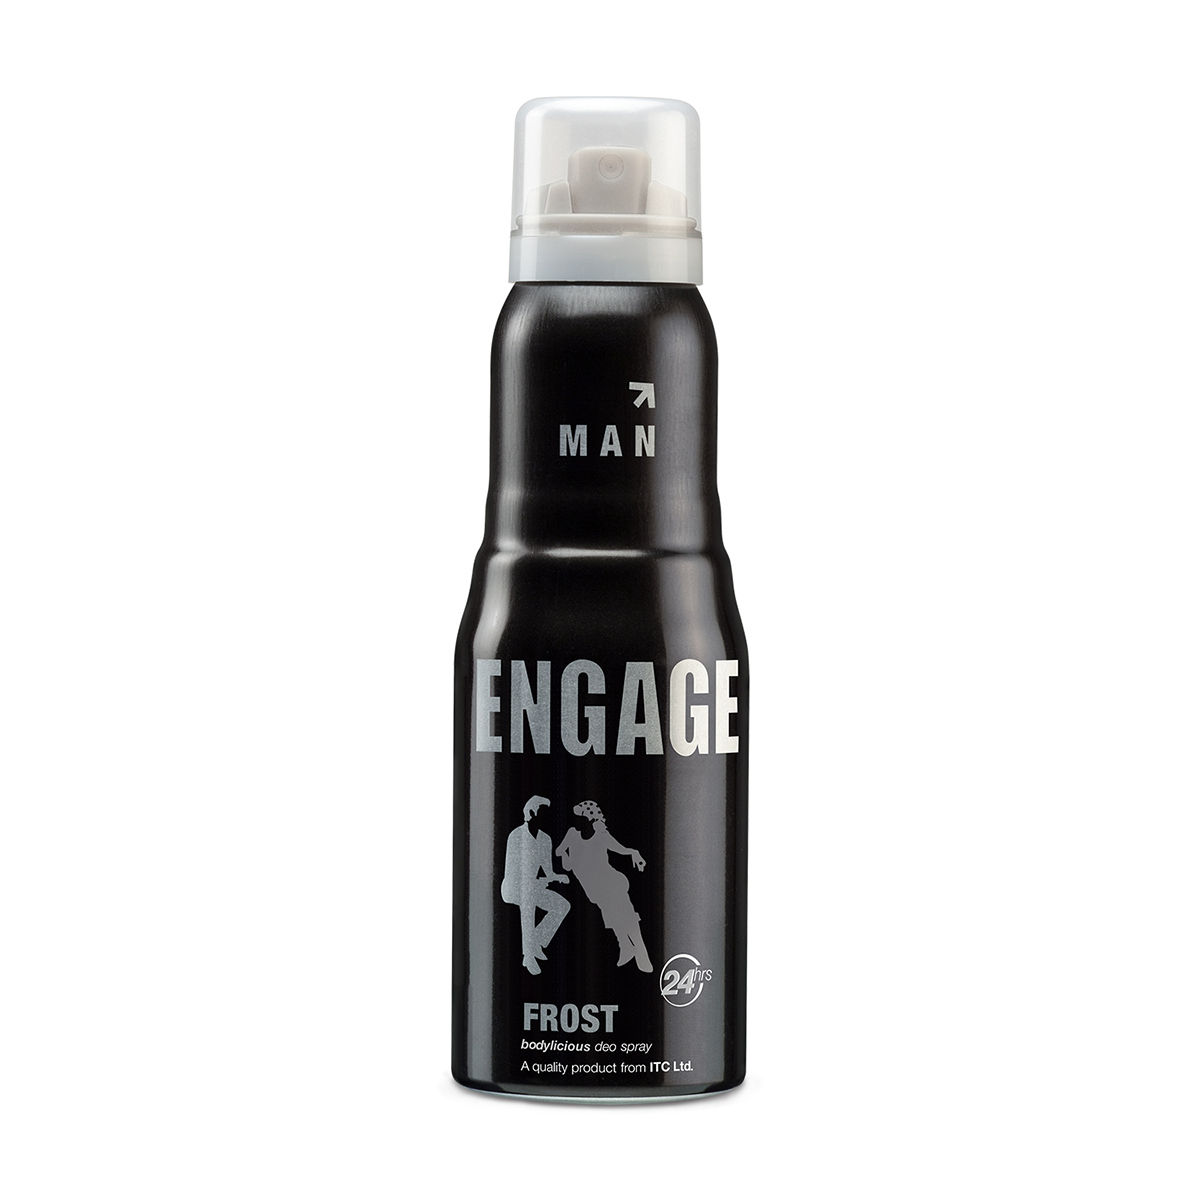 Engage Frost Deodorant For Men